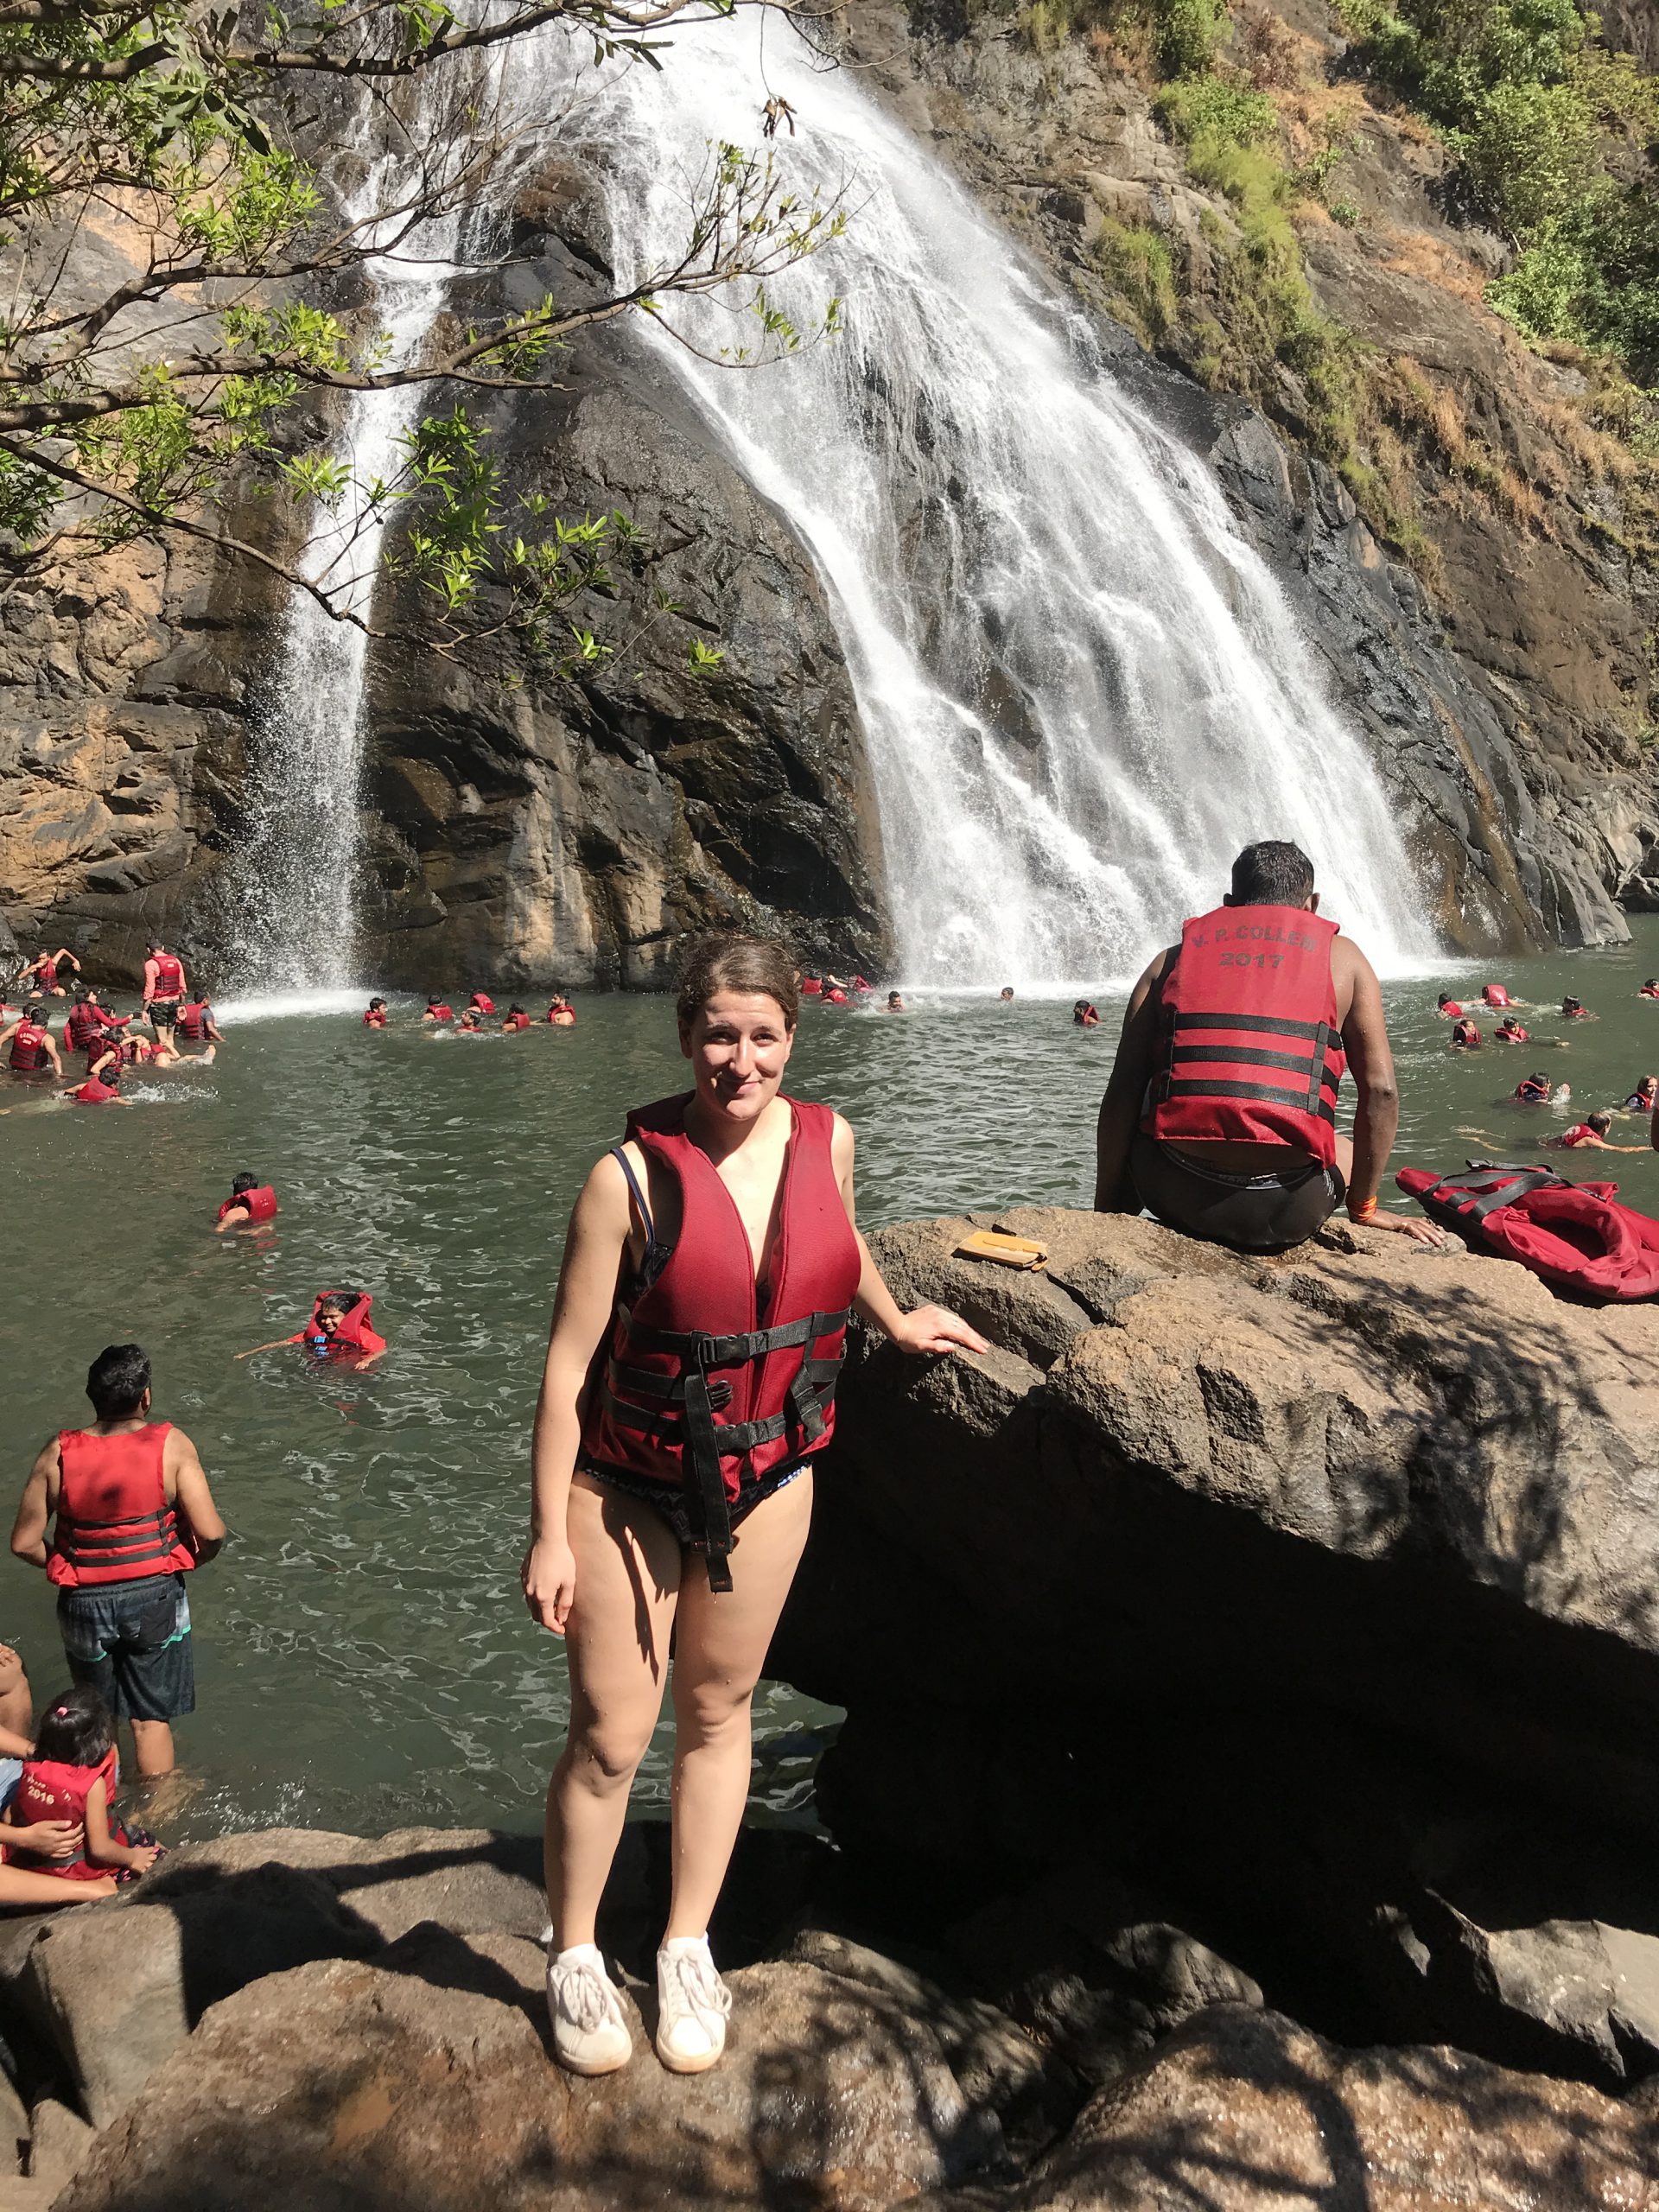 Visiting Dudhsagar Falls in Goa India on New Year's day